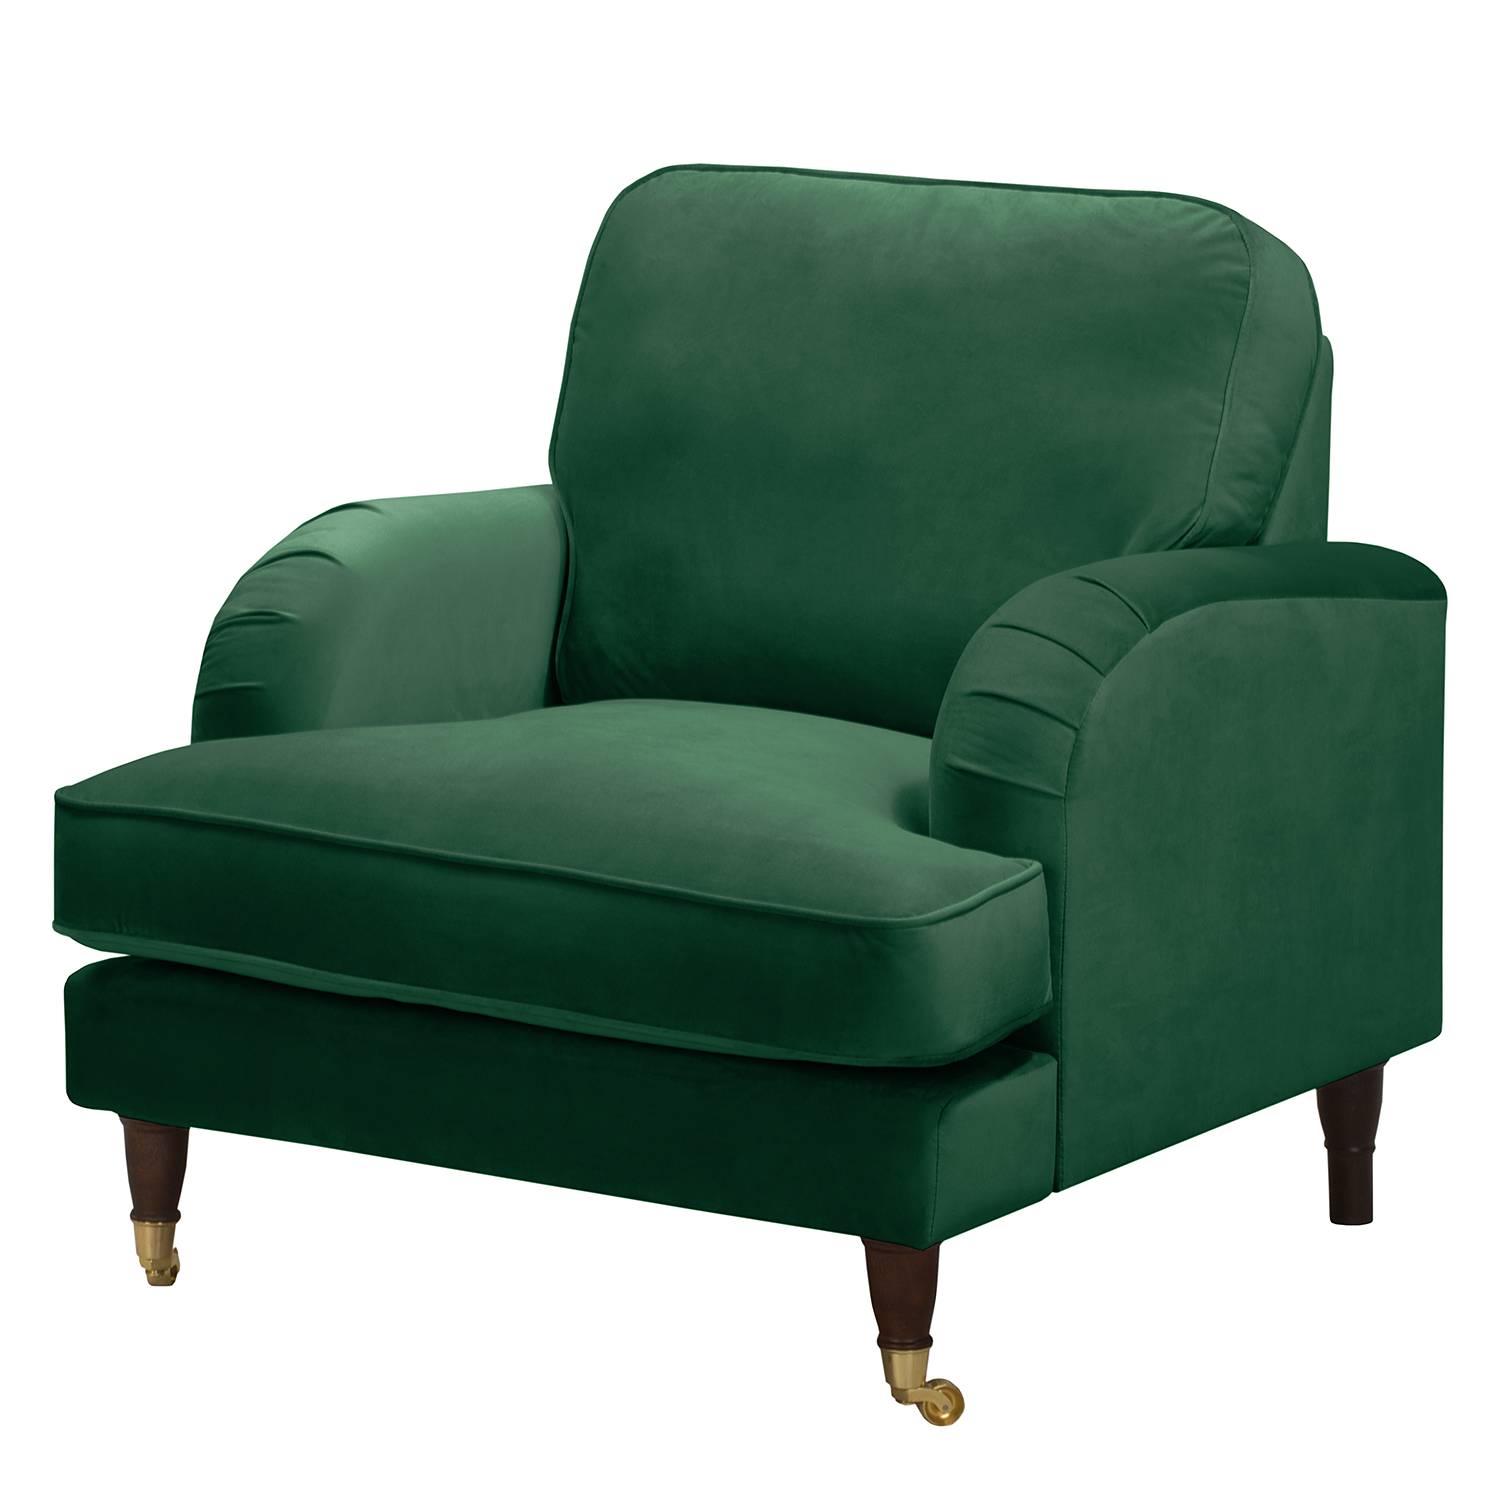 Image of Fauteuil Bethania I 000000001000145886